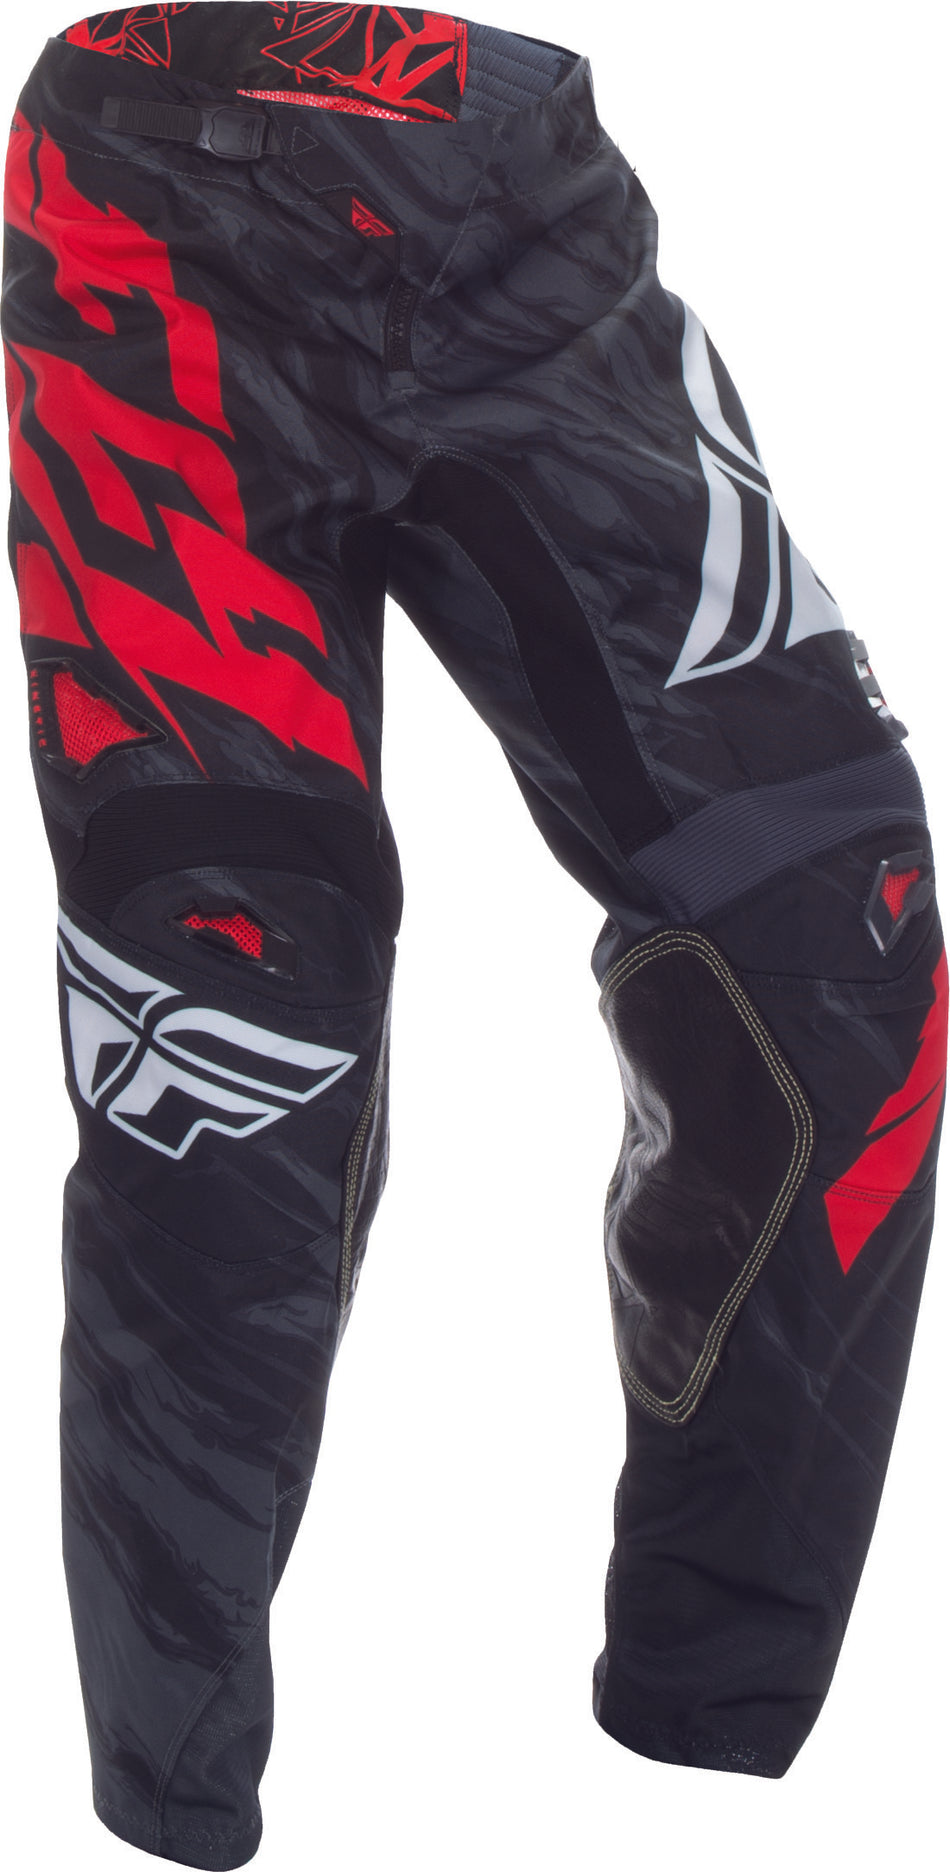 FLY RACING Kinetic Relapse Pant Black/Red Sz 20 370-43020